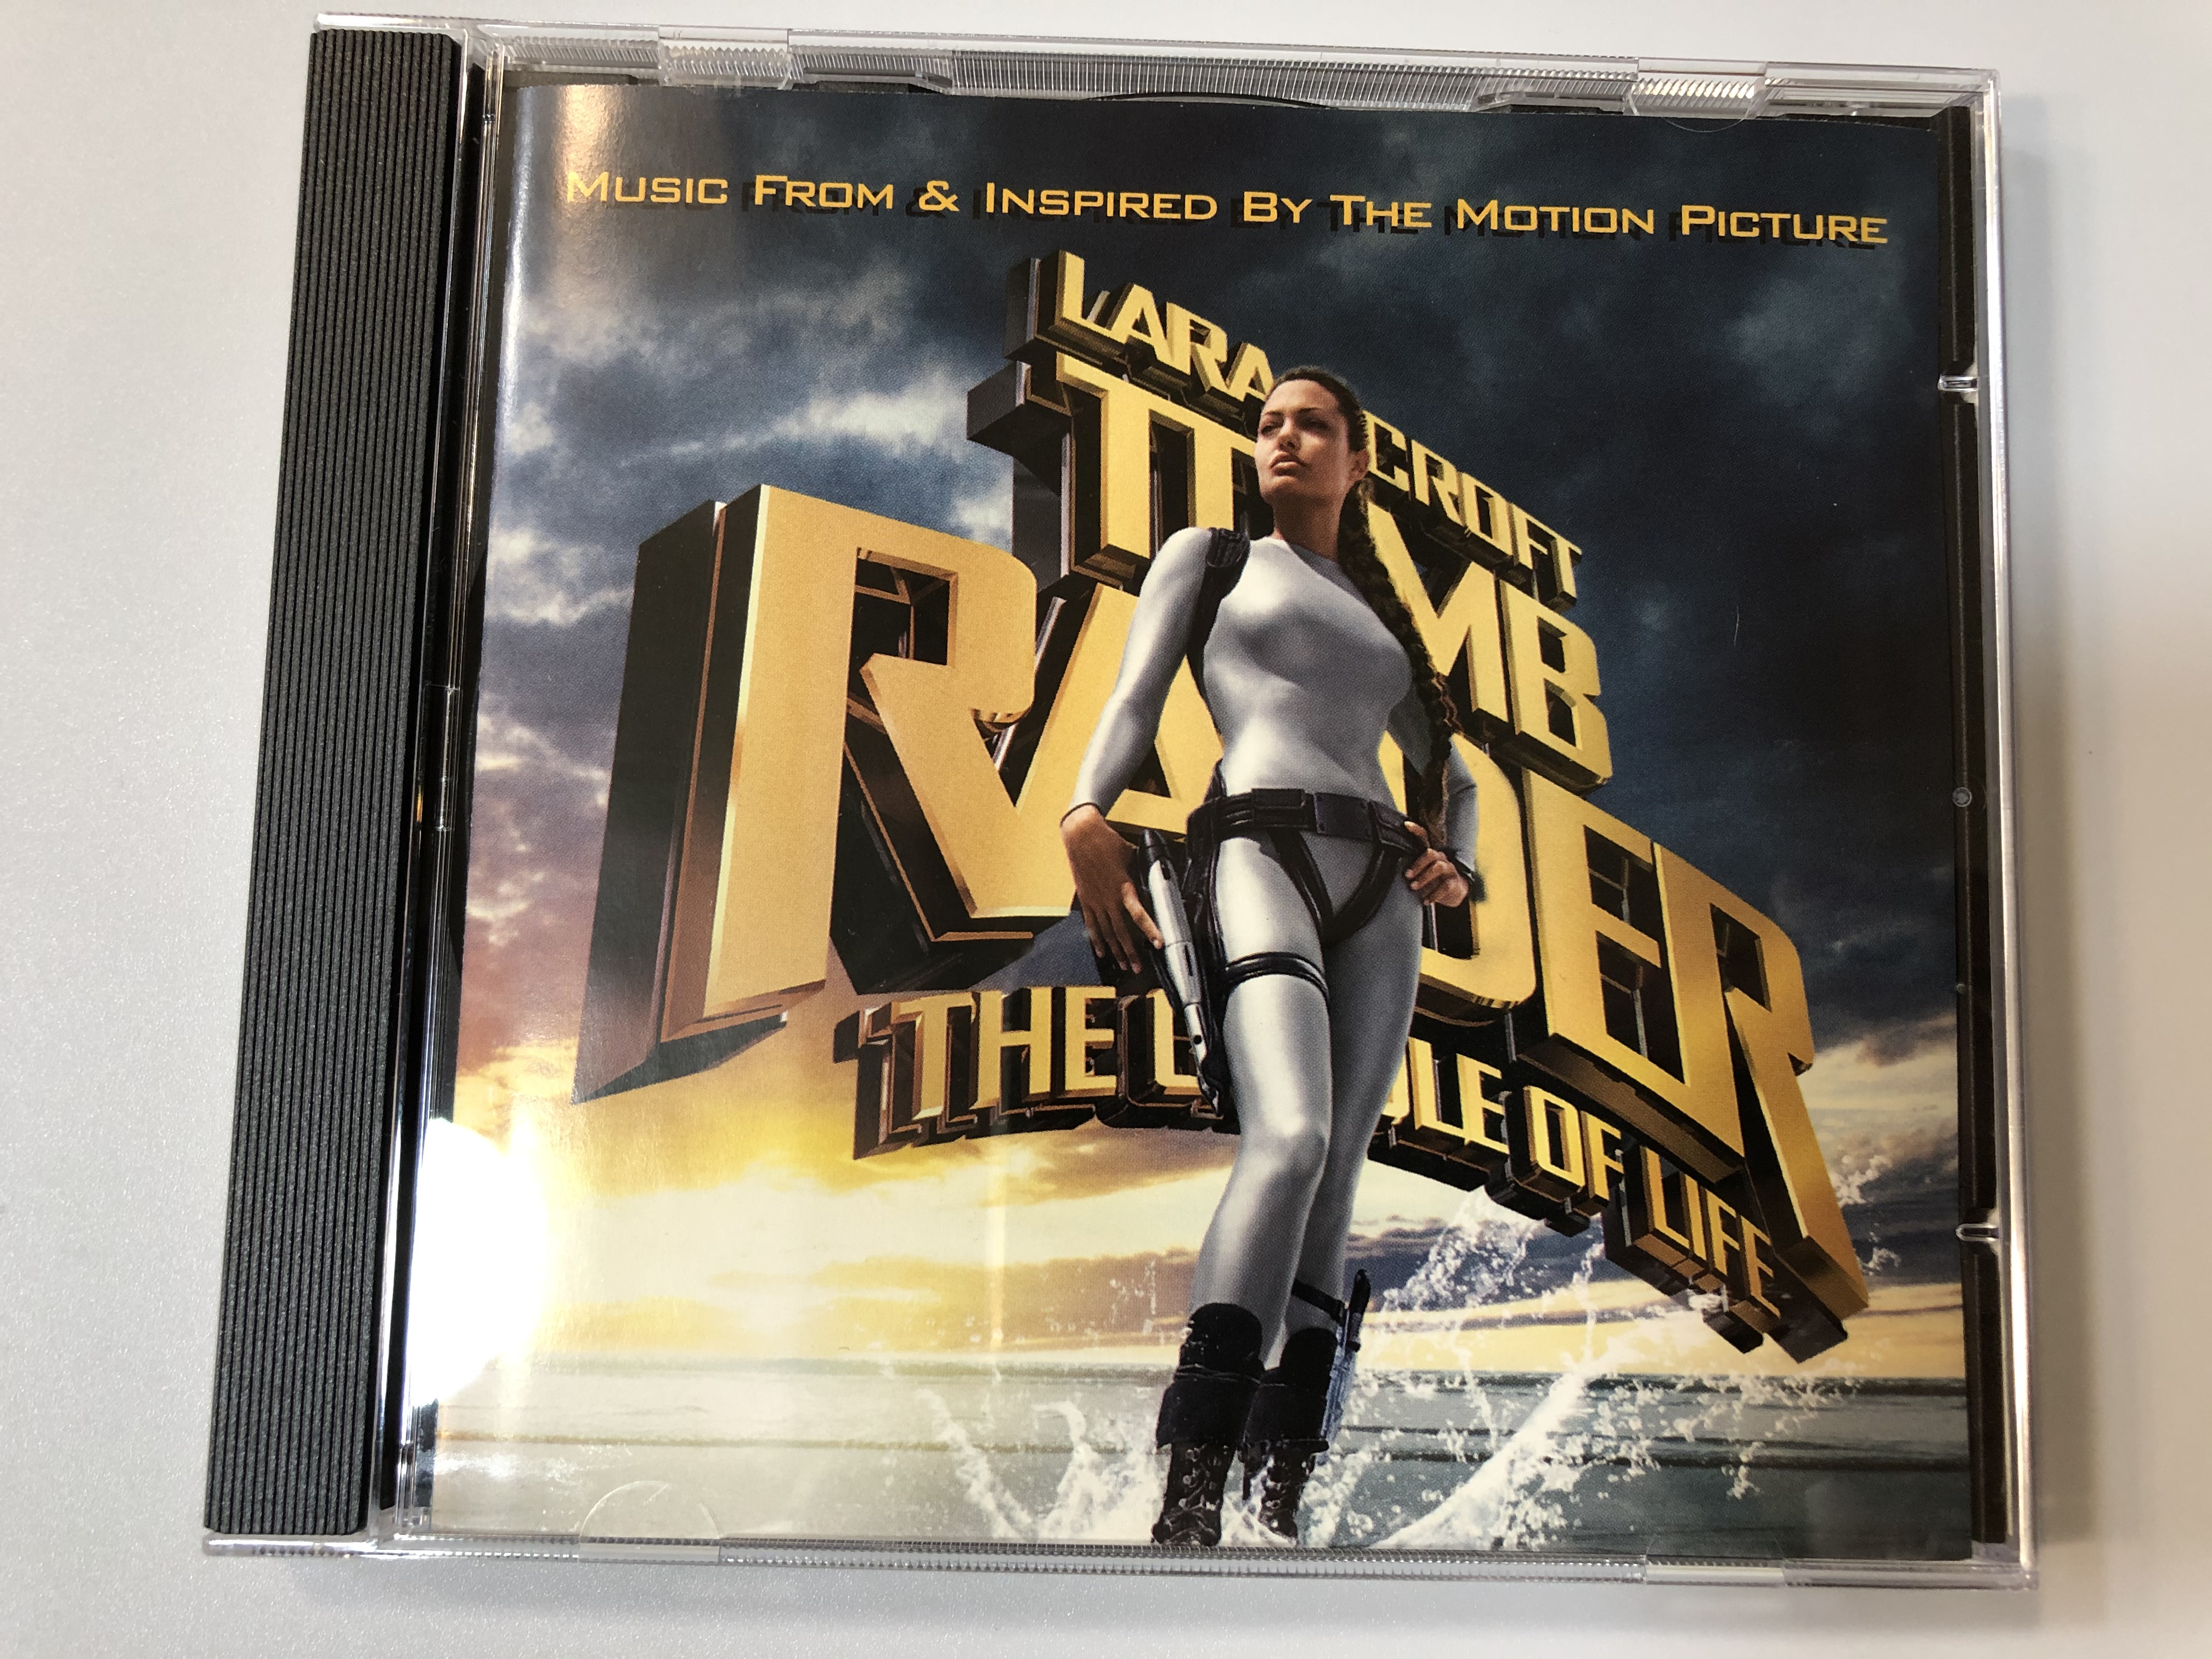 music-from-inspired-by-the-motion-picture-lara-croft-tomb-raider-the-cradle-of-life-hollywood-records-audio-cd-2003-5050466-8073-2-8-1-.jpg